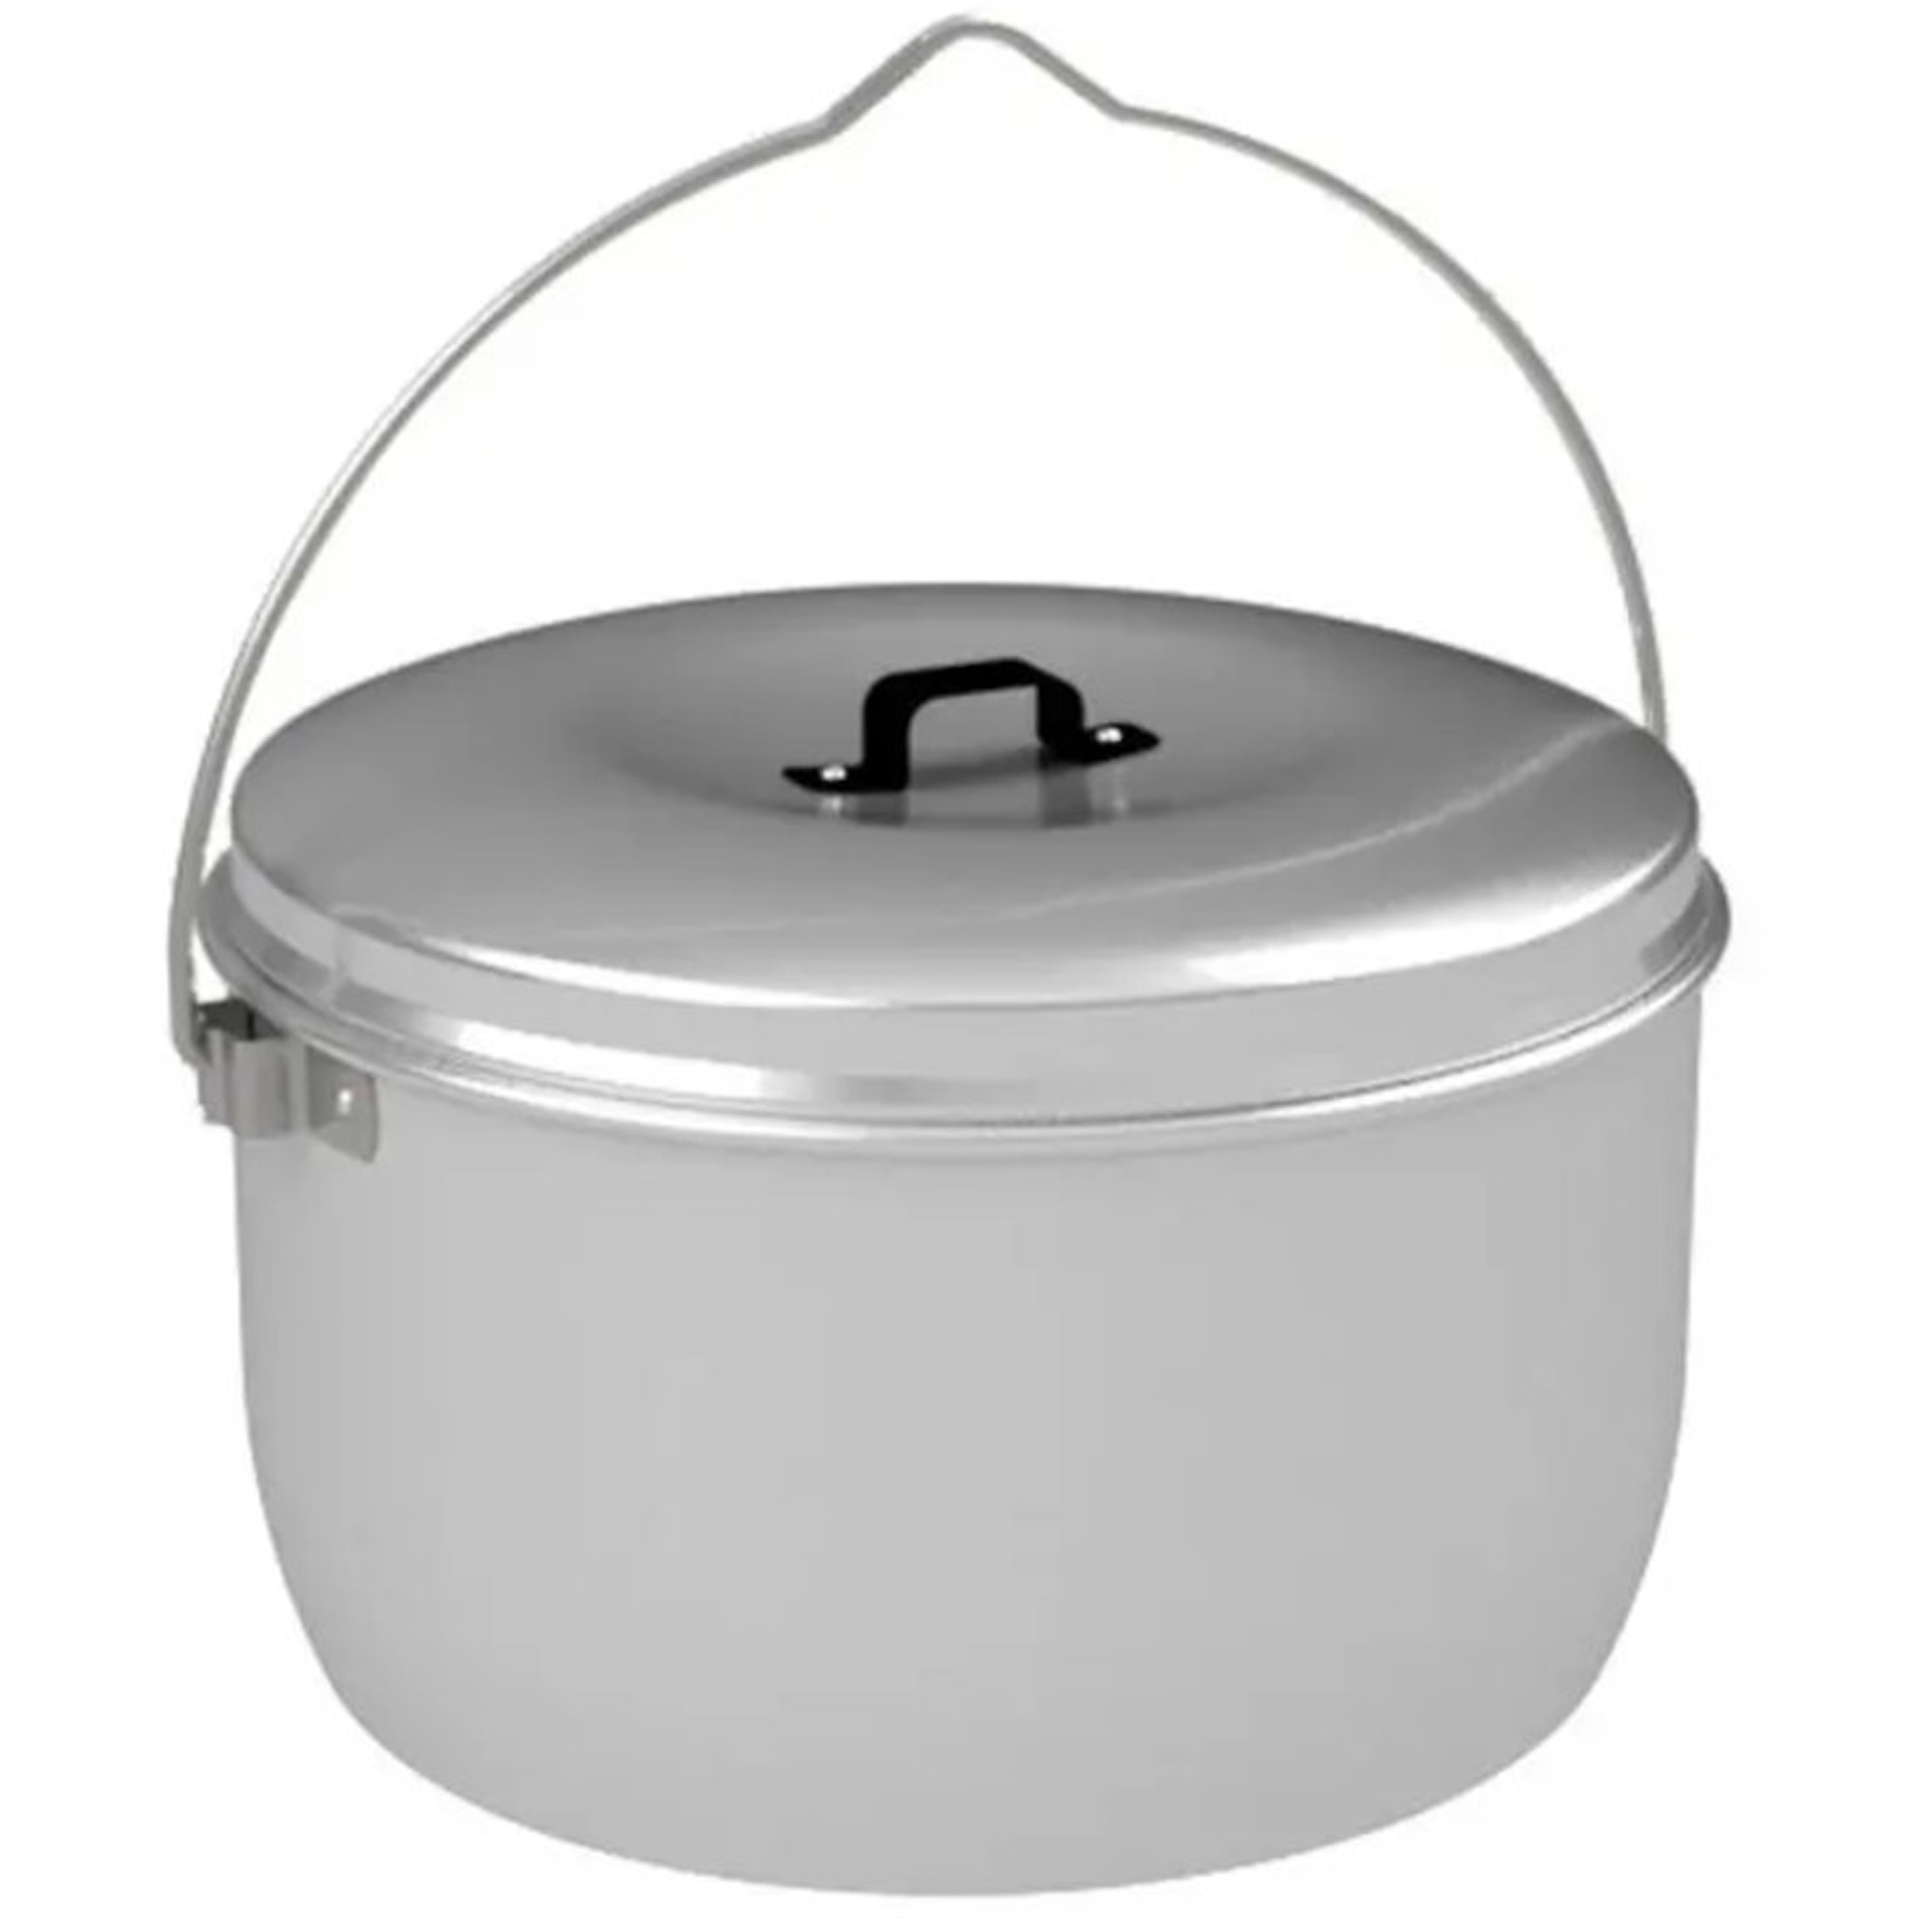 Trangia Billy & Lid 4.5L 501251 Camping Cookware with Bail Handle